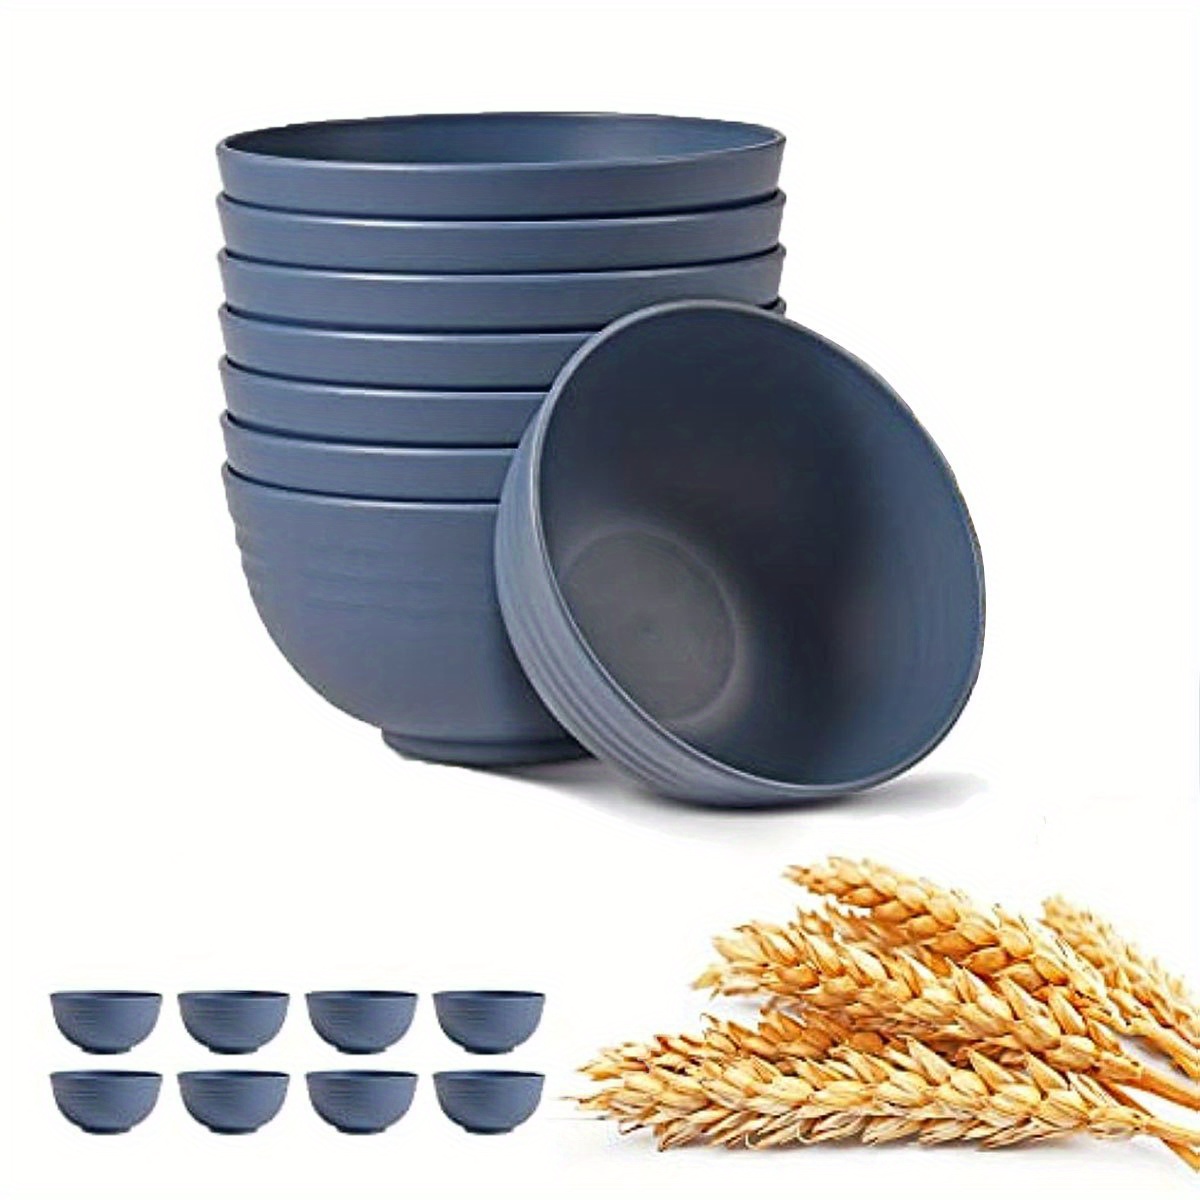 Wrova Wheat Straw Bowl Sets,8 PCS Unbreakable Cereal